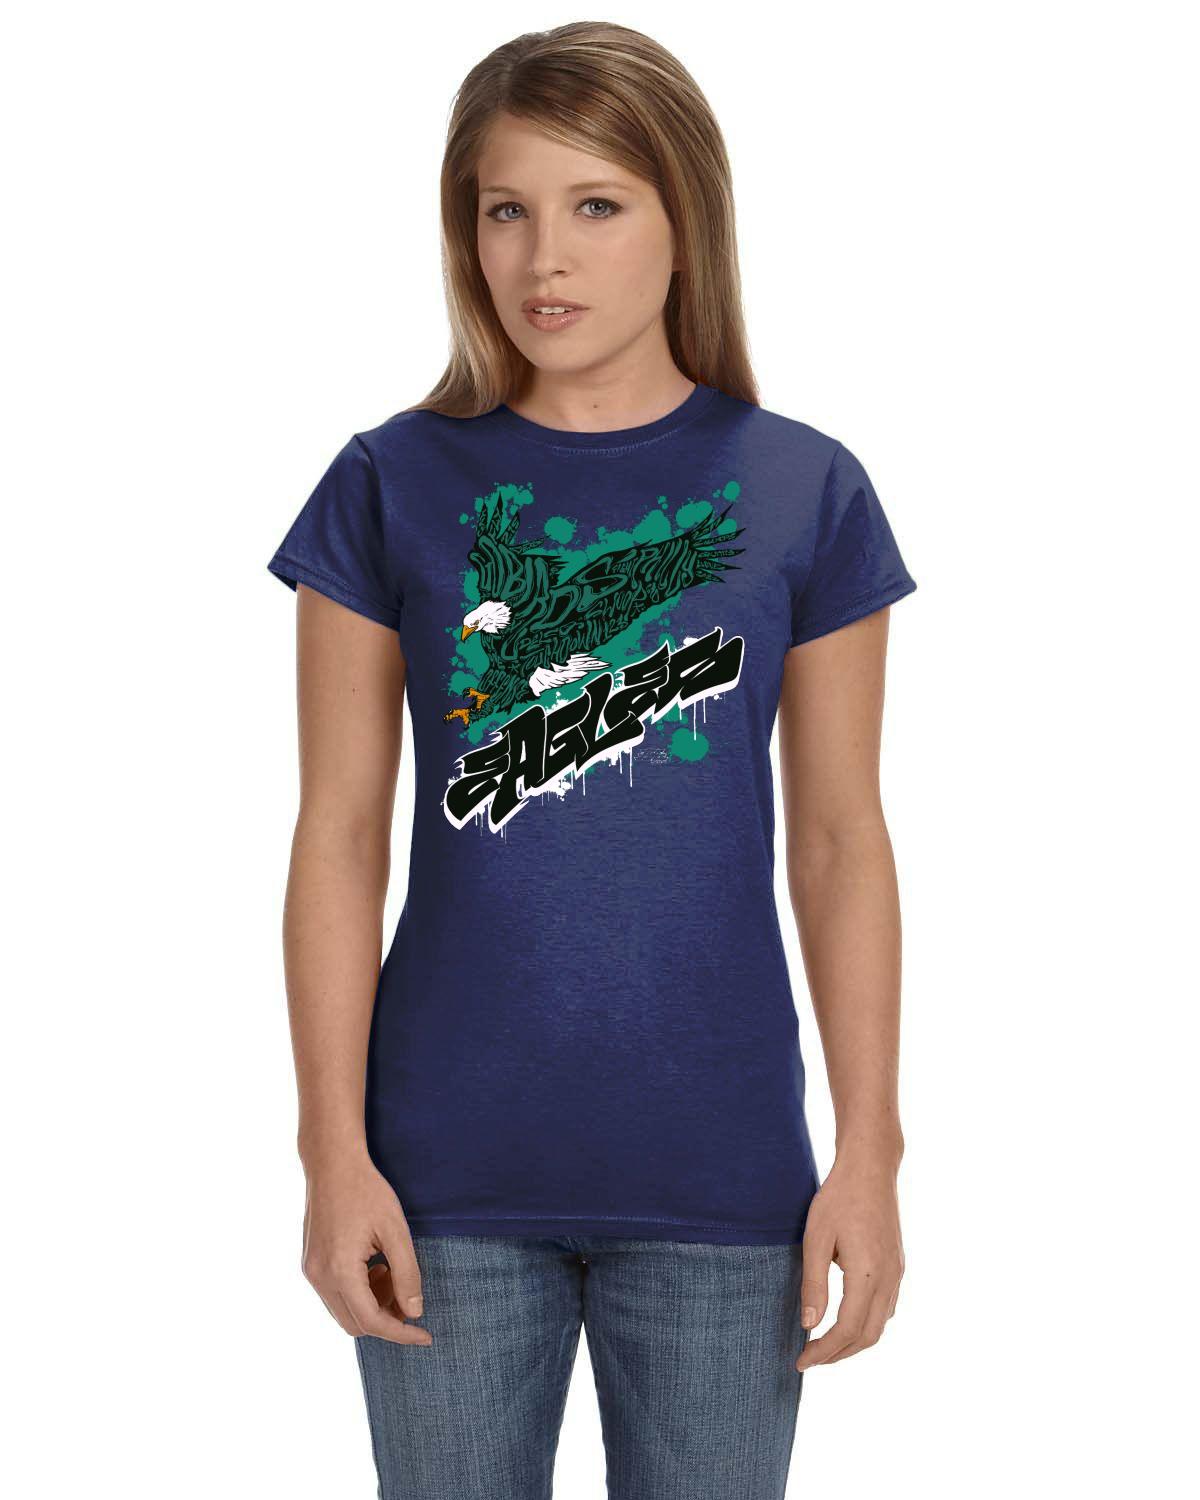 Eagles Fly 2022 Gildan Ladies' Softstyle 7.5 oz./lin. yd. Fitted T-Shirt | G640L